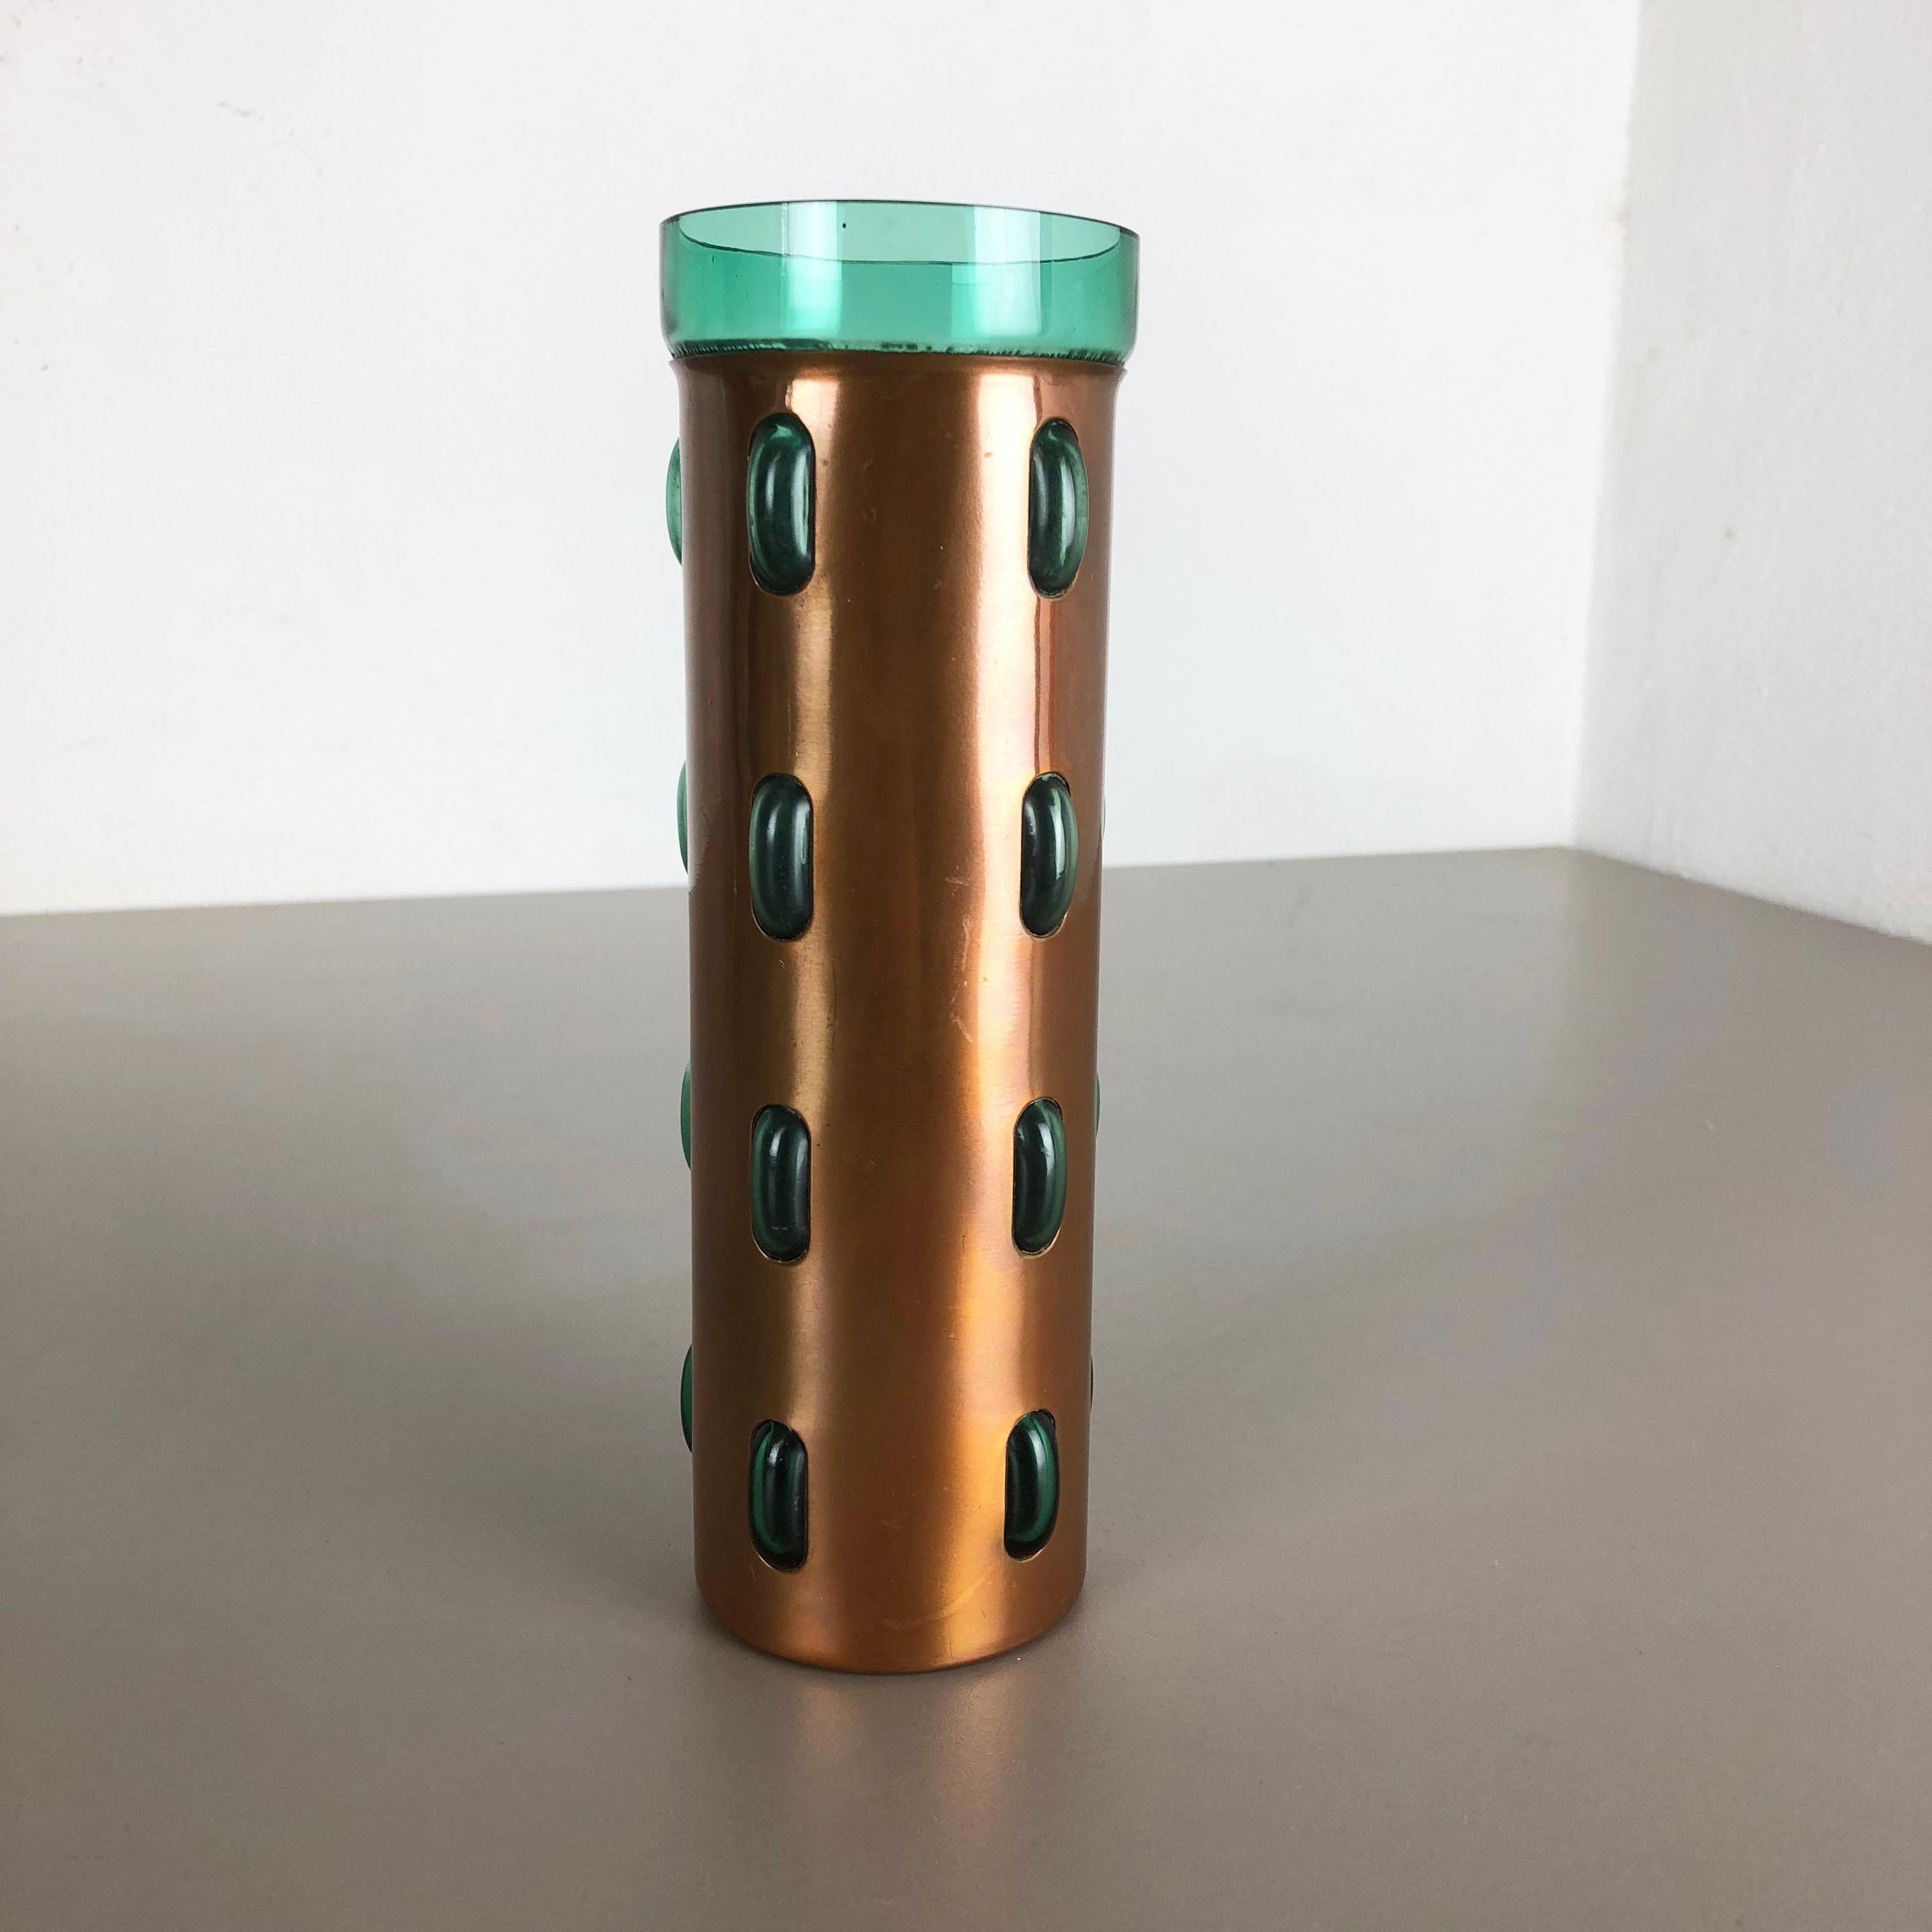 Dutch Cylindrical Vase in Green Glass and Copper by Nanny Still for RAAK, 1970s For Sale